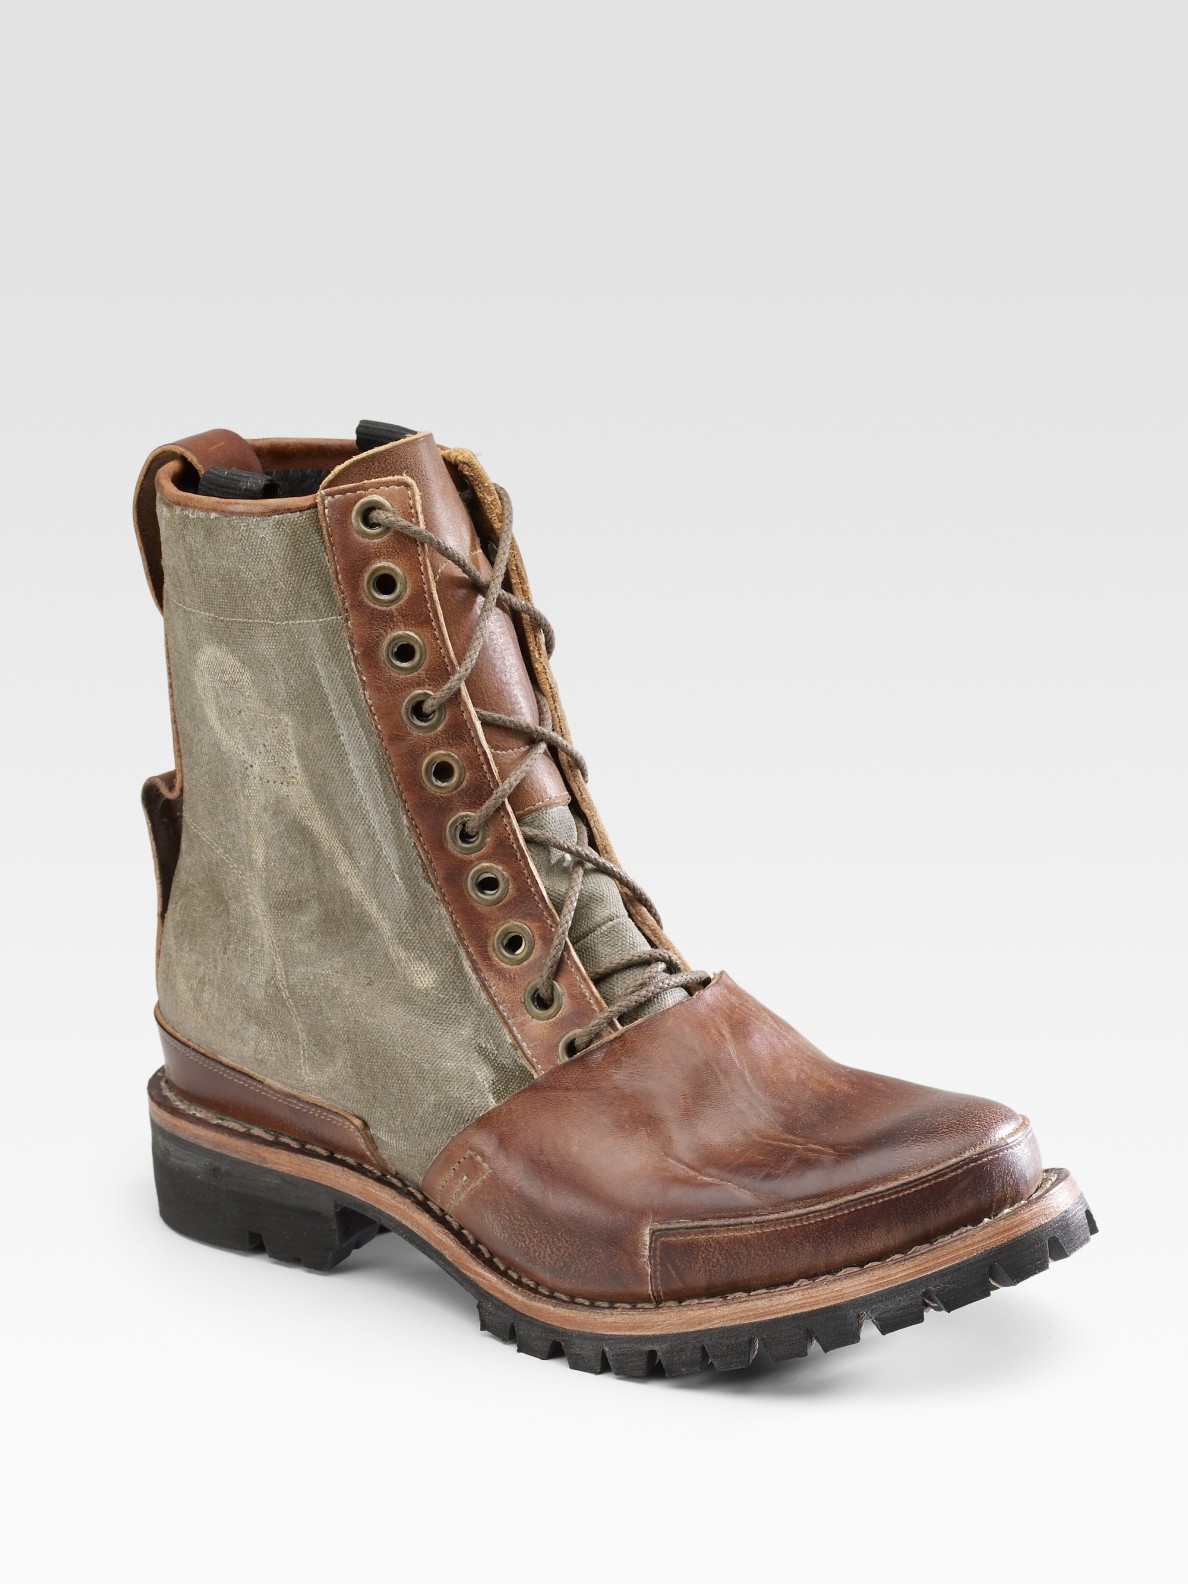 Timberland Tackhead Winter Boots in Brown for Men - Lyst